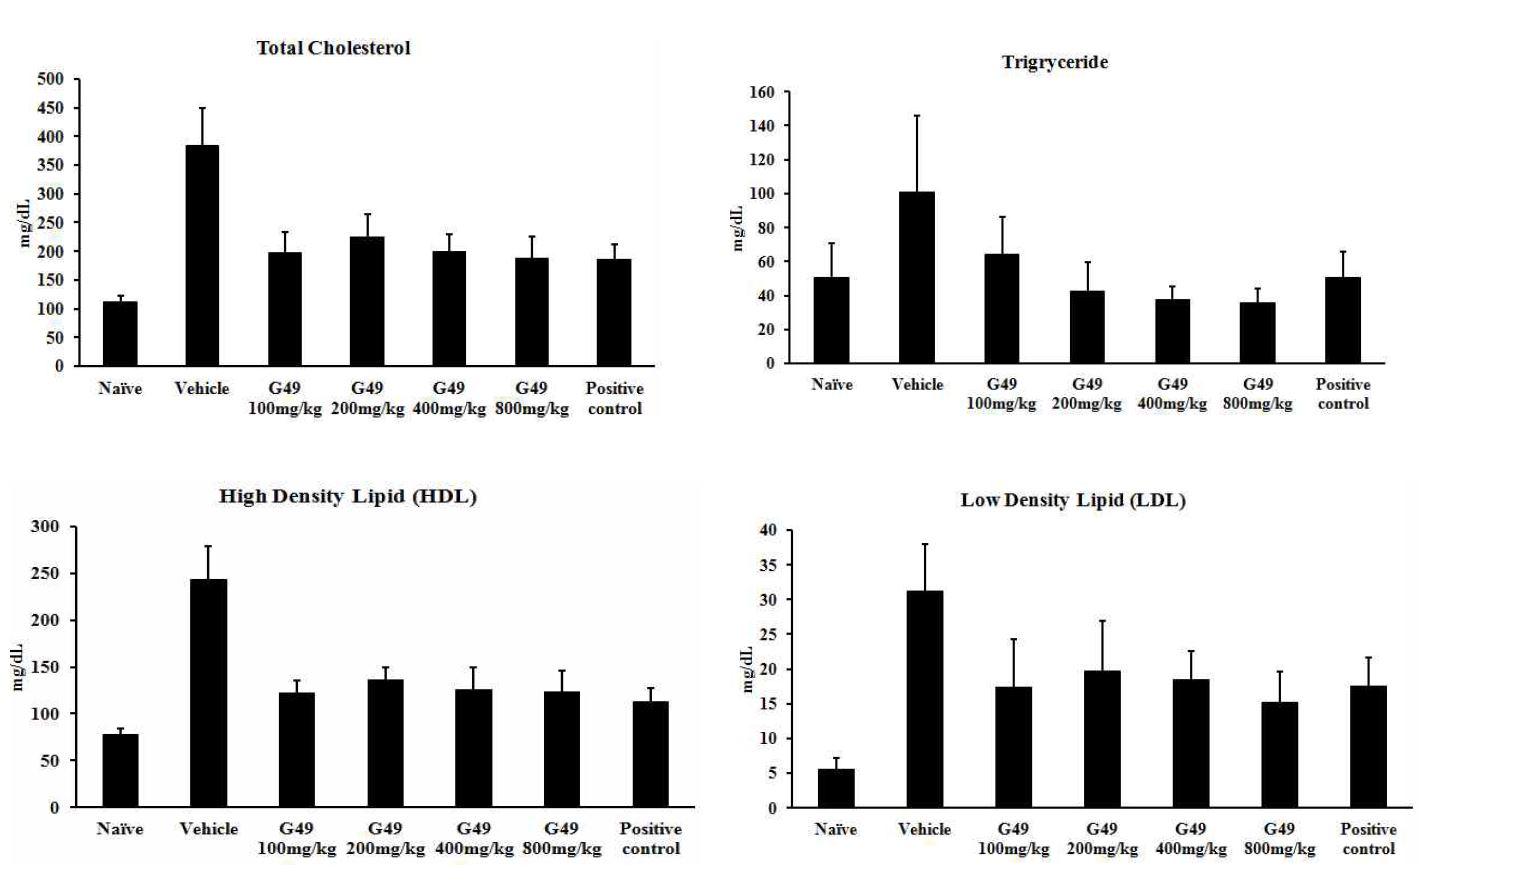 Analysis of cholesterol and triglyceride in male C57BL/6 mice treated with Ligularia fischeri ethanol extract during 12 weeks.